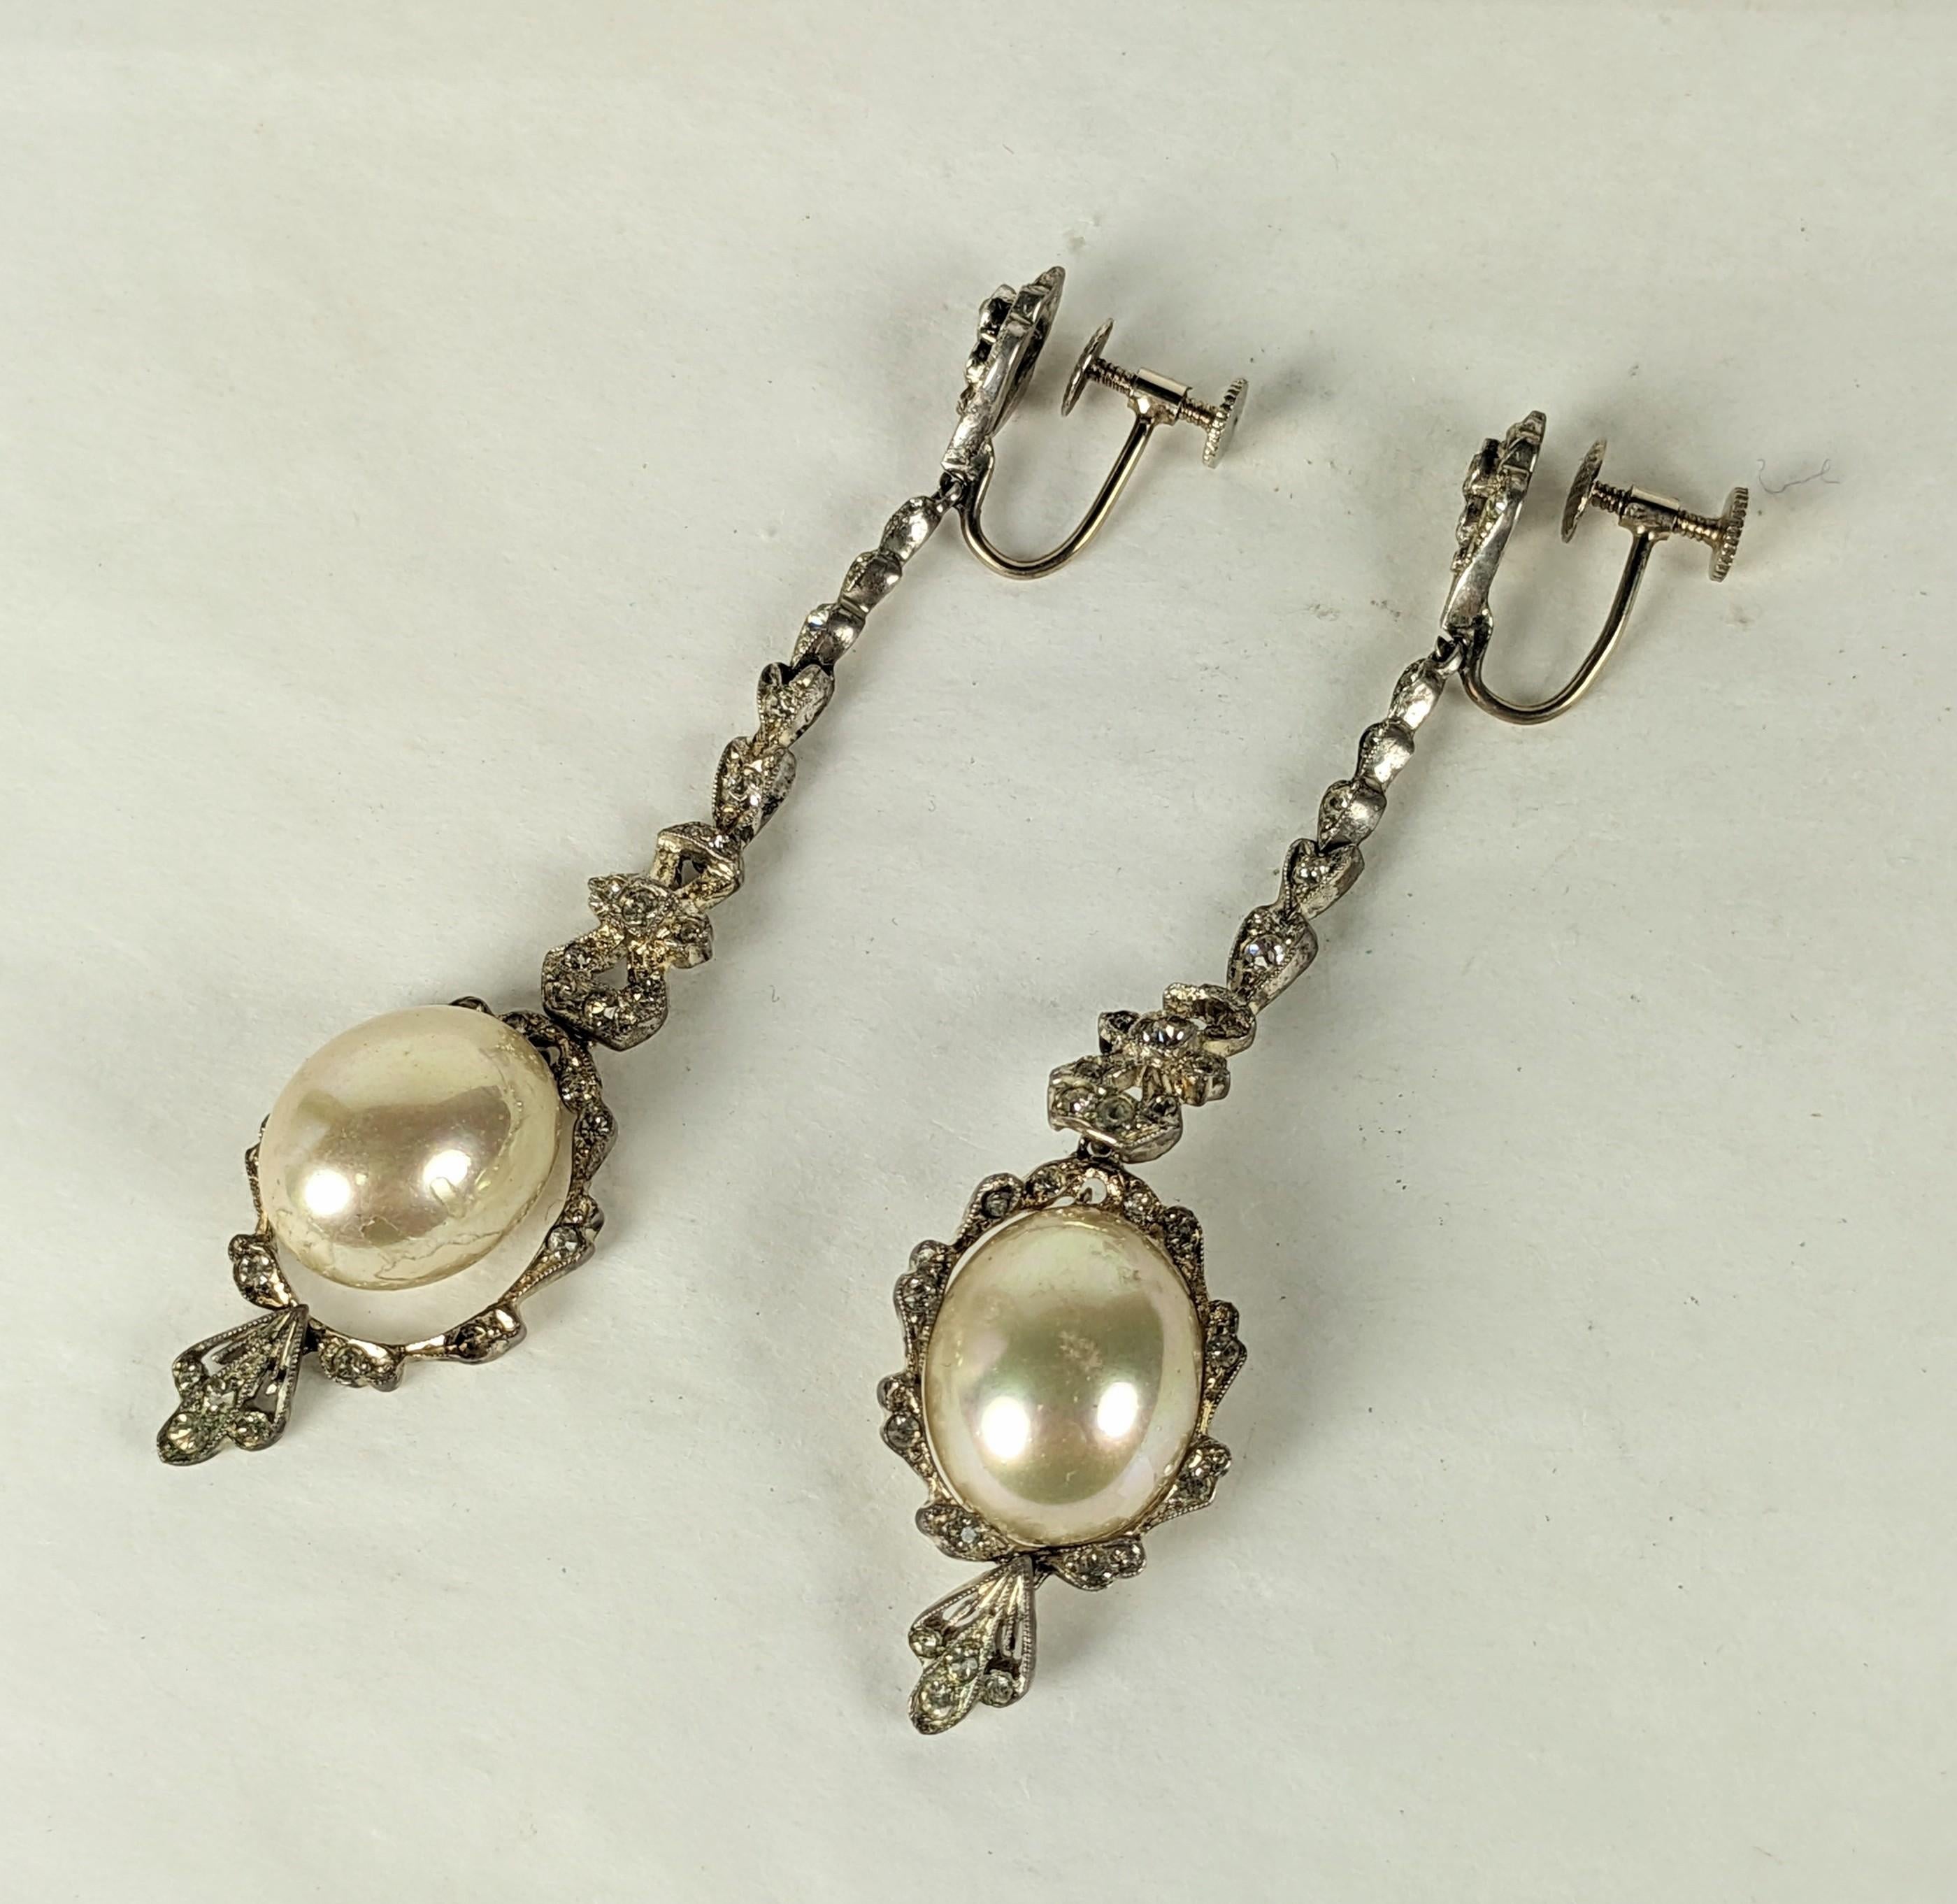 Lovely Delicate Edwardian Paste and Faux Pearl Earrings from the early 1900's. Tiny pastes set in articulated, hinged sterling with 14k white gold screw back fittings and glass pearl. 
High quality workmanship. USA 1900's. 3